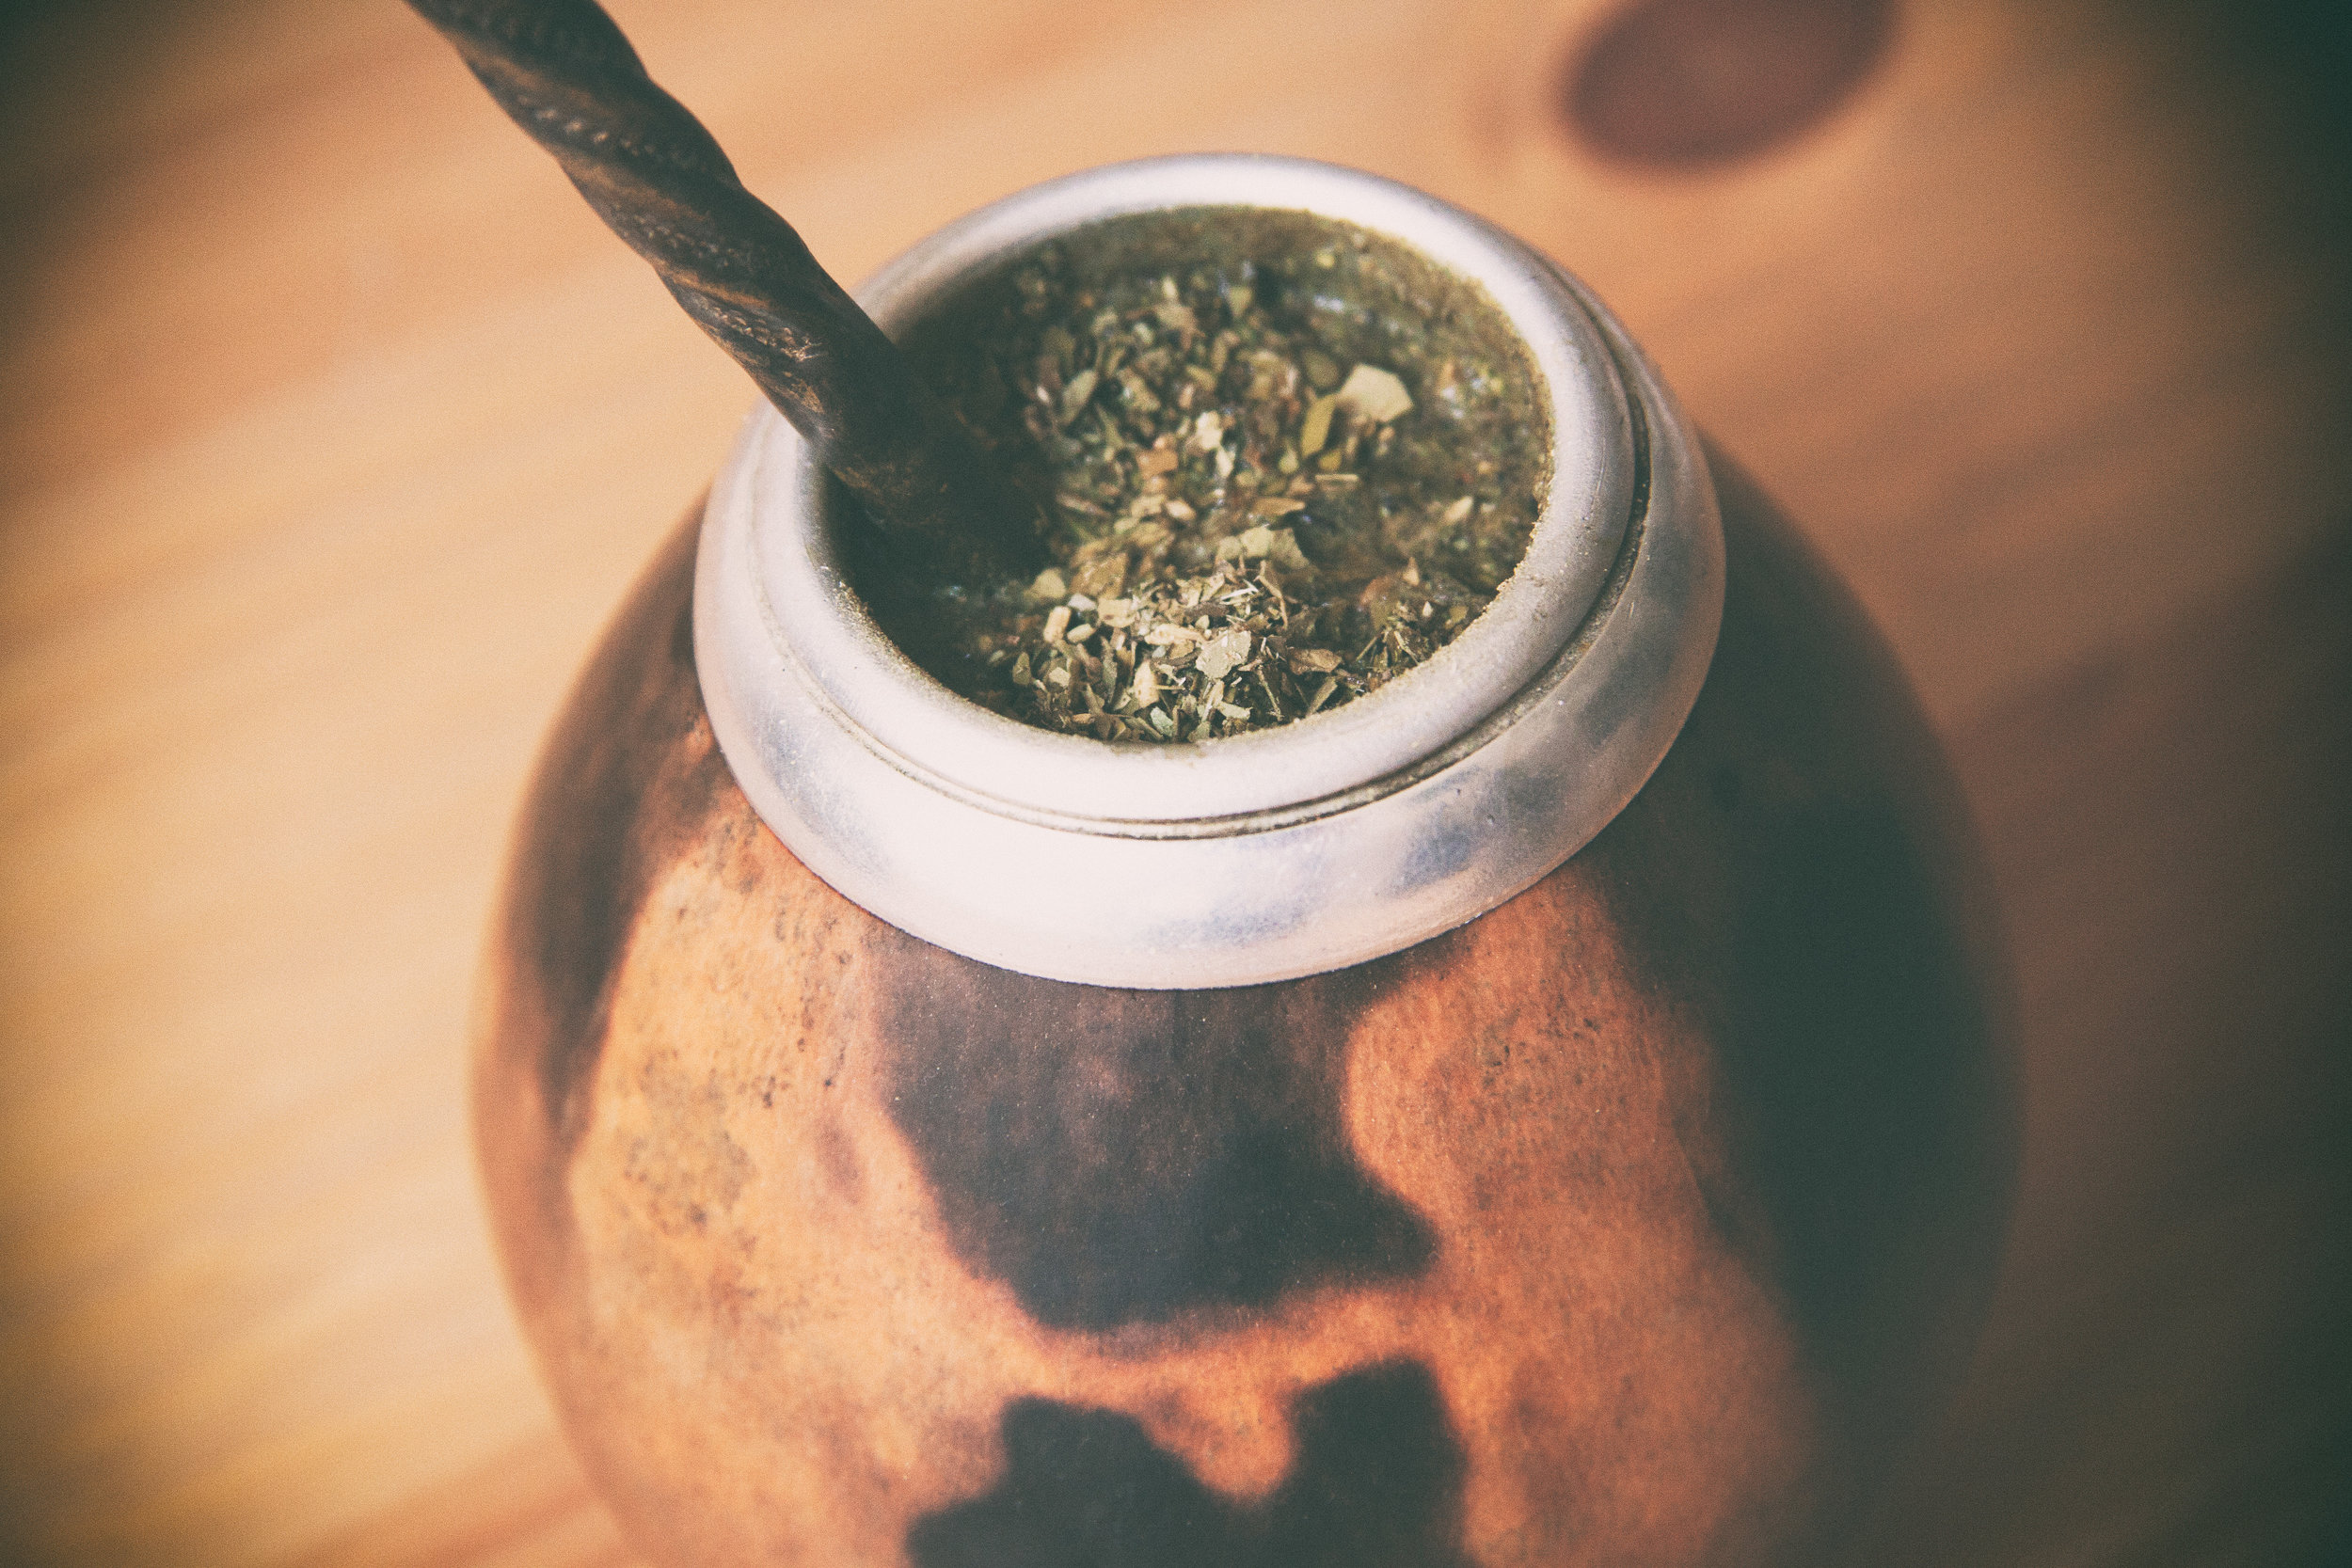 The importance of mate in the Argentine culture